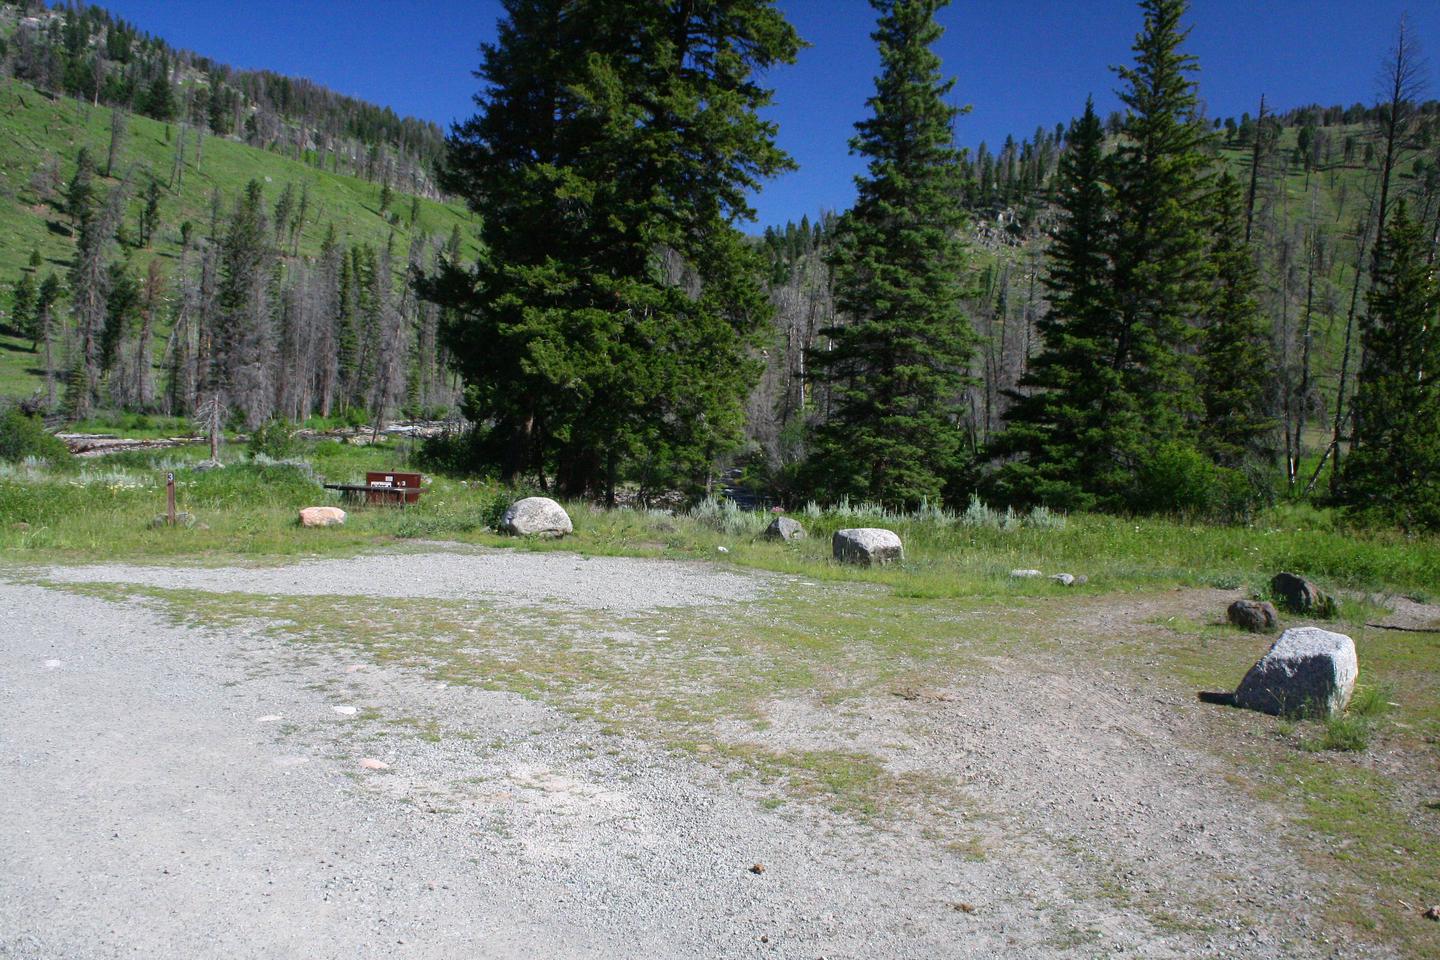 Slough Creek Campground Site #3....Slough Creek Campground Site #3